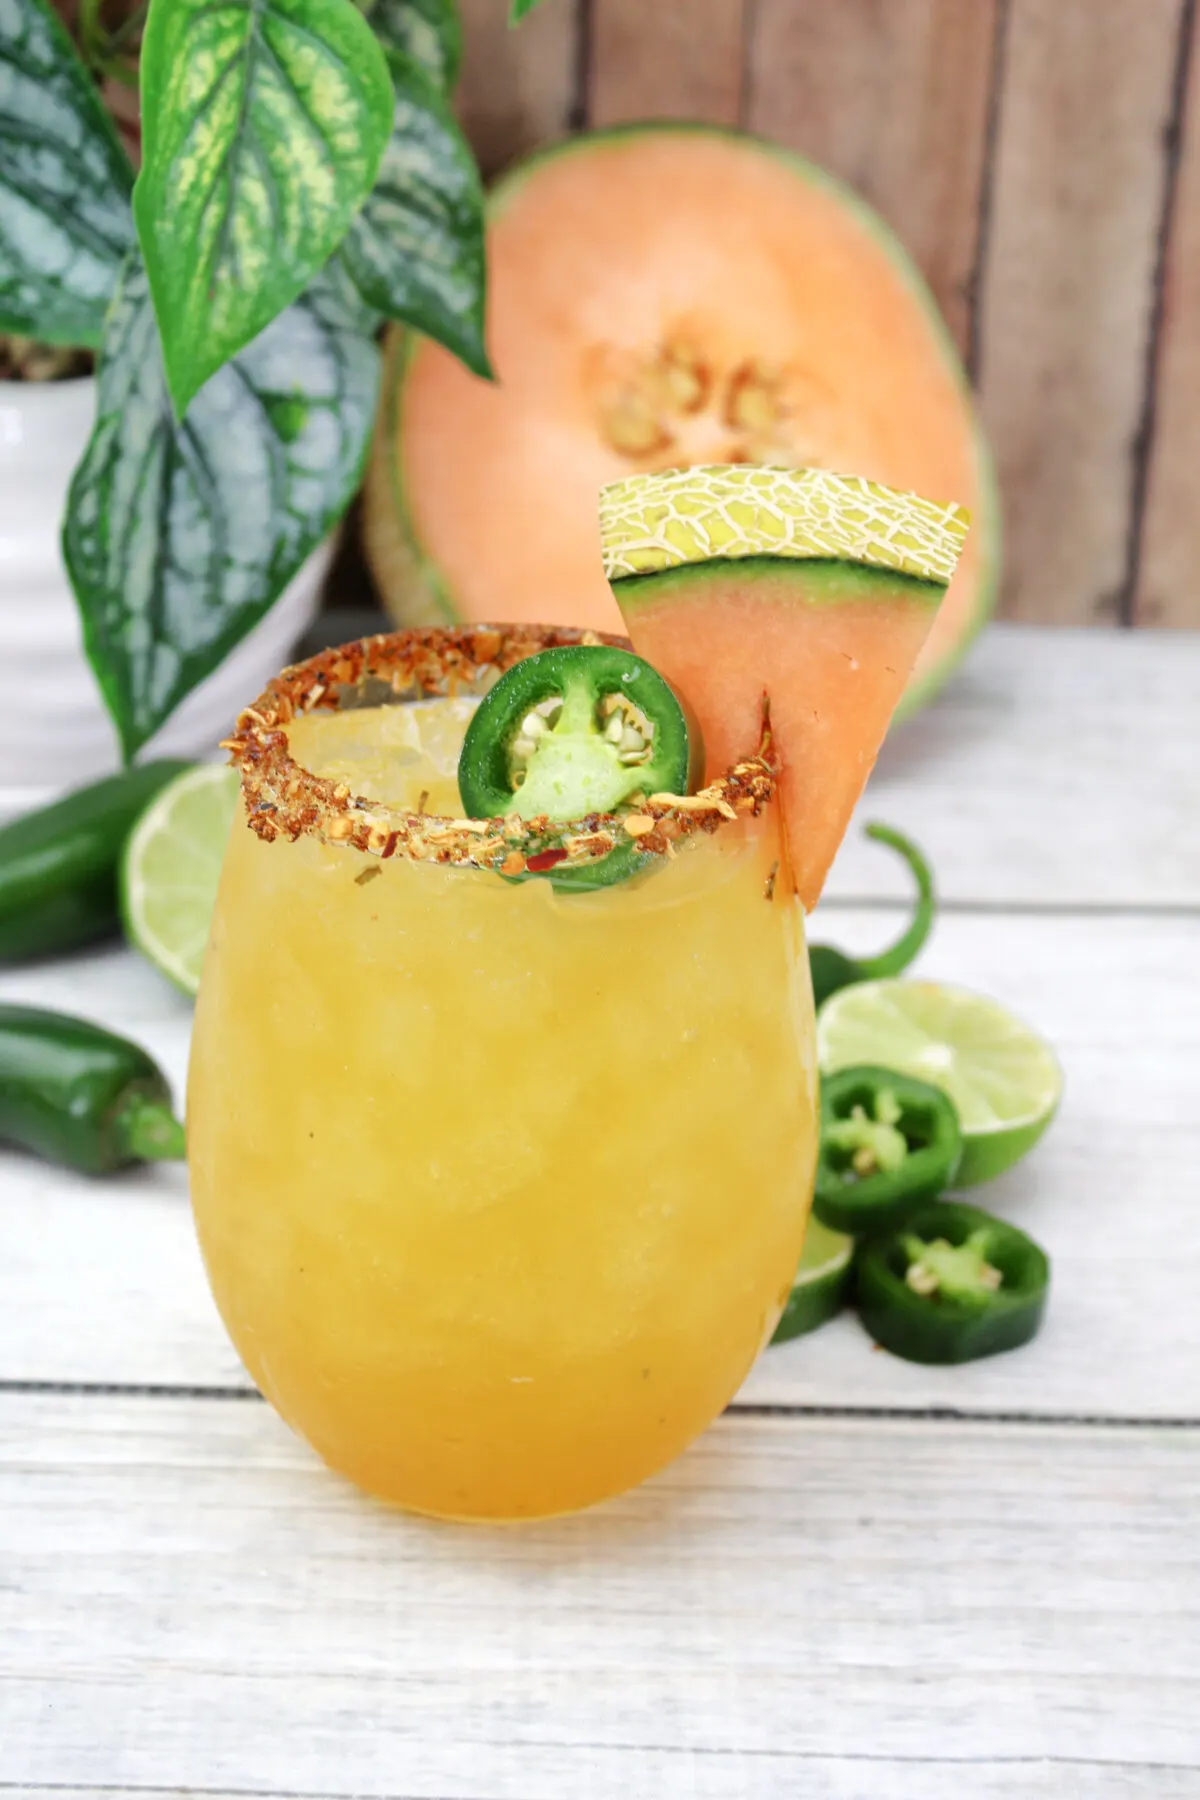 Take your margarita to the next level with this Jalapeno Cantaloupe Margarita recipe featuring refreshing cantaloupe with a spicy twist.